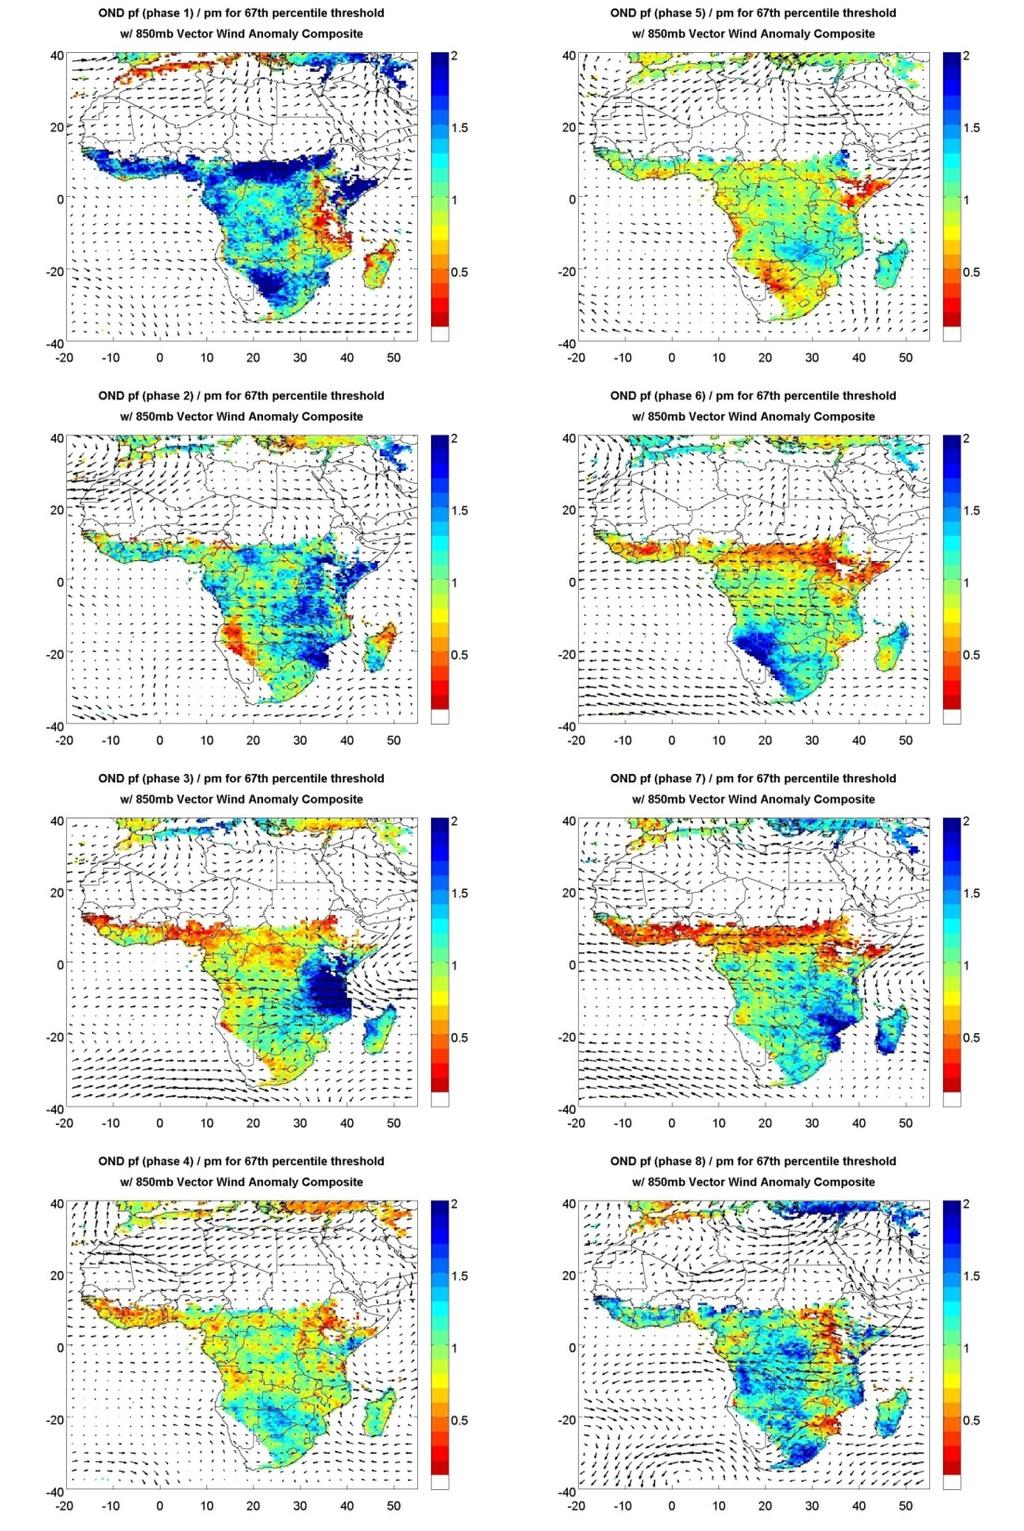 MJO Rainfall Anomaly Composite Oct- Dec, 1983-2012 The ac/ve phase of the MJO is located over Africa during phase 8 2 of the MJO in the Wheeler- Hendon diagram